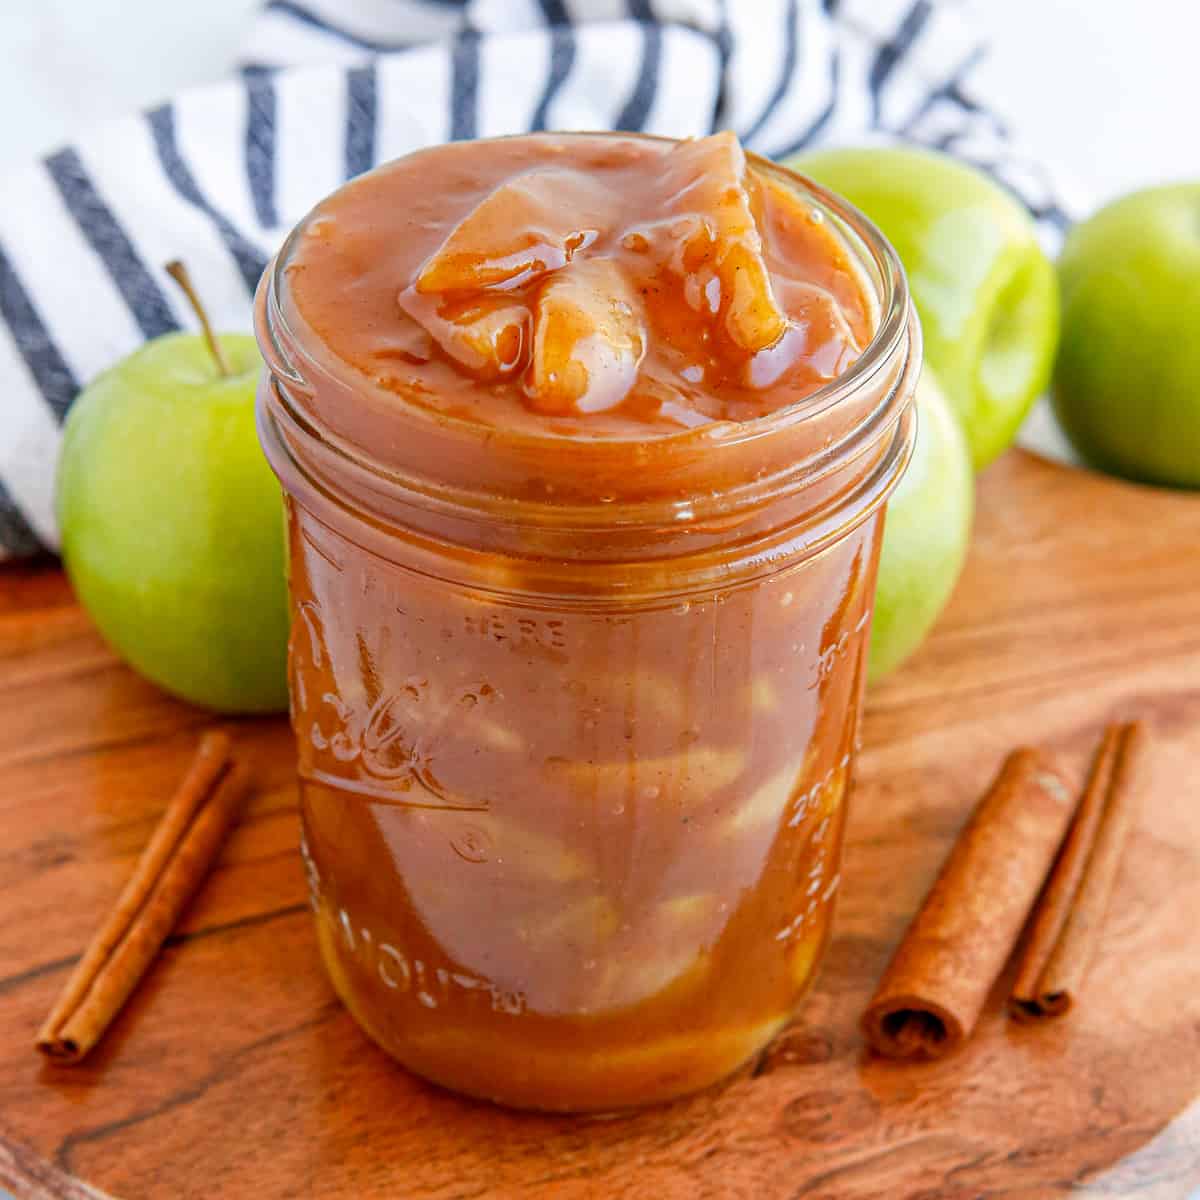 Apple pie filling in a wide mouth mason jar with cinnamon sticks and apples around it.